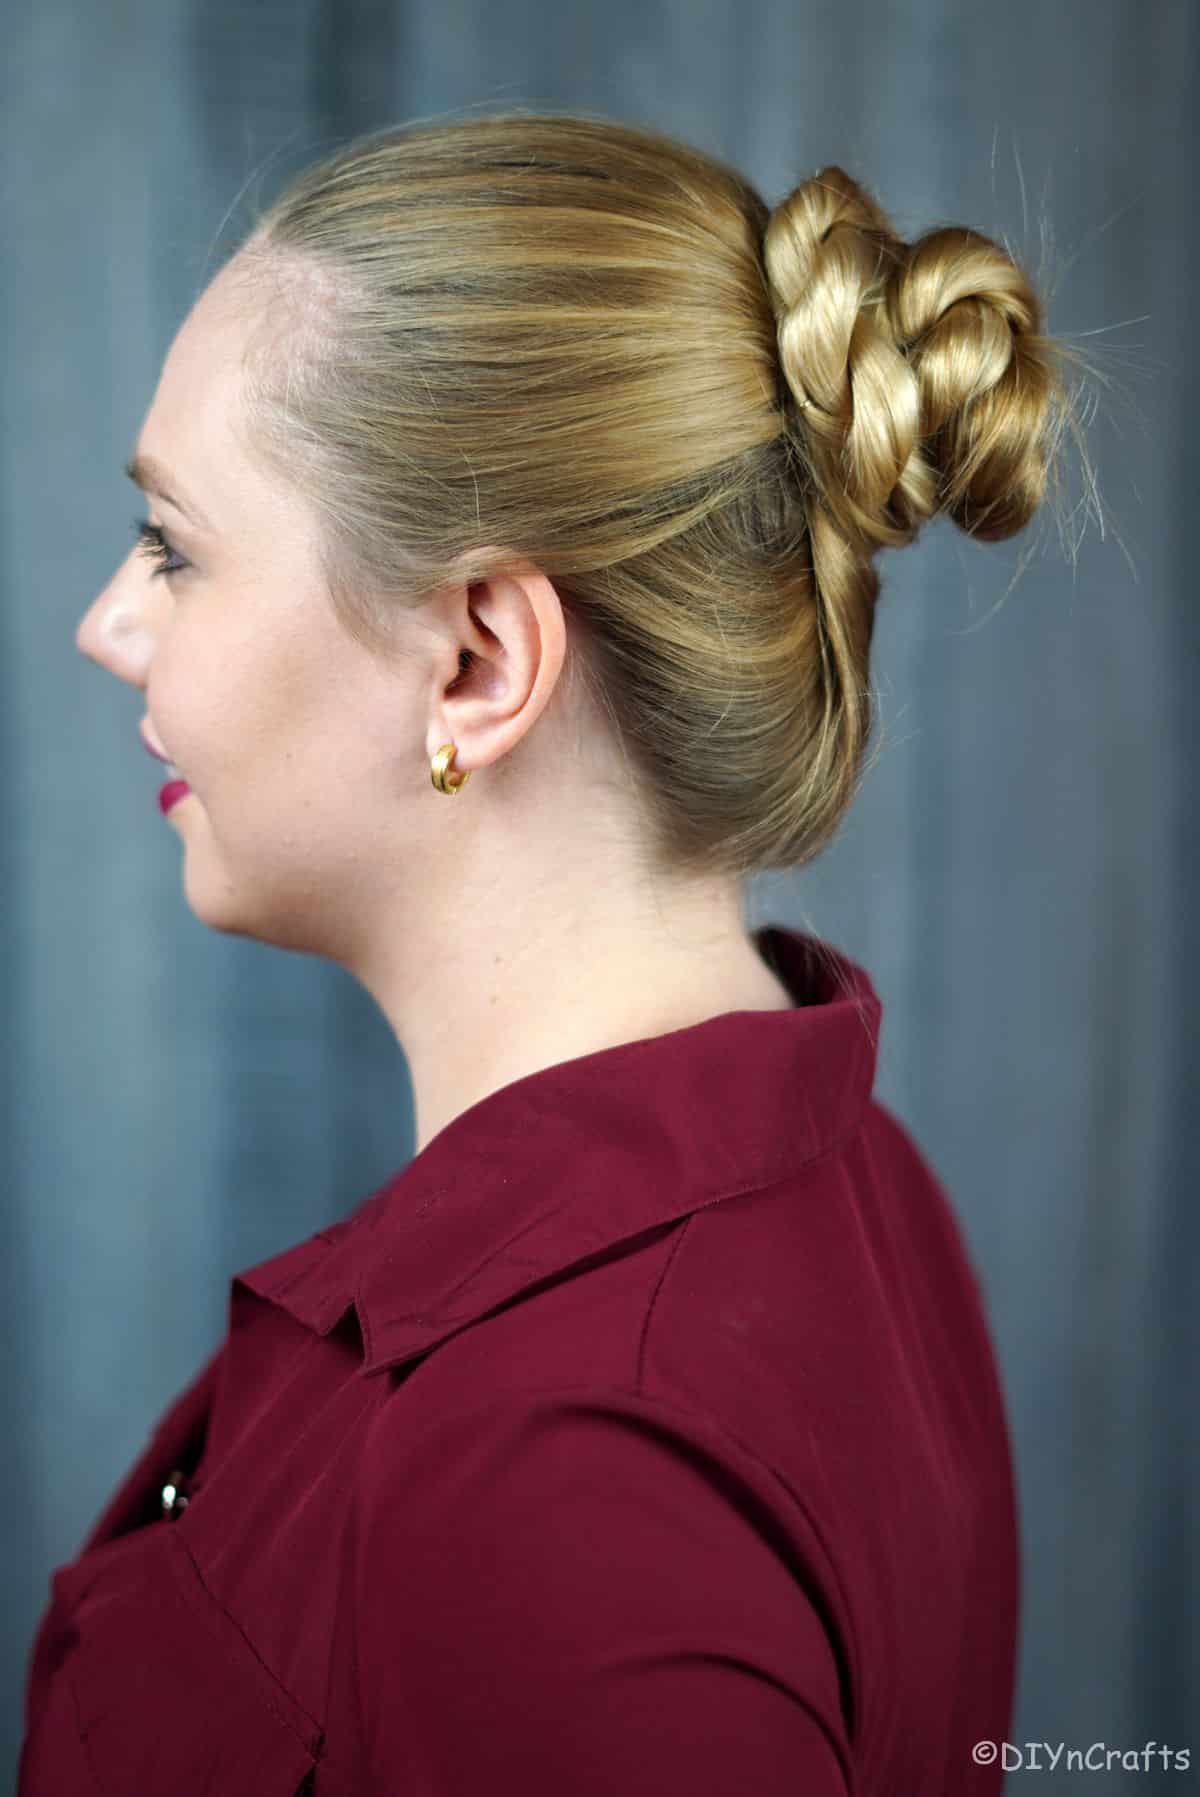 blonde in red shirt with twisted rope bun